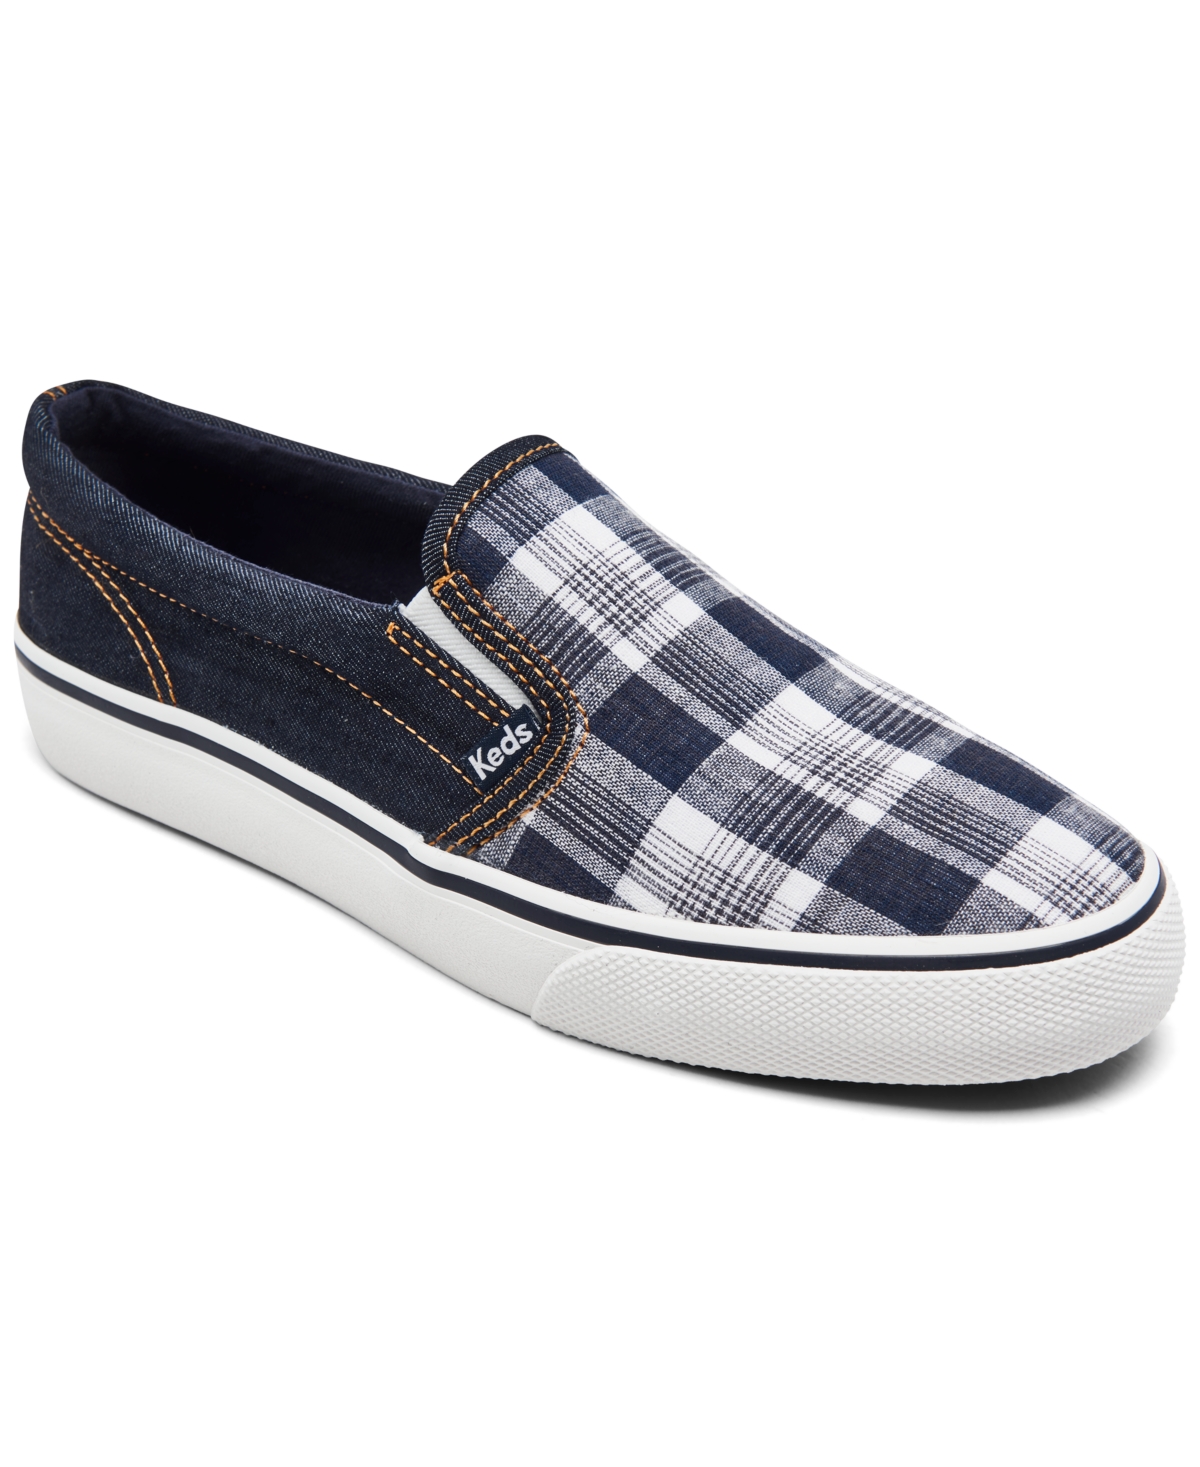 UPC 195018114792 product image for Keds Women's Jump Kick Slip-On Canvas Casual Sneakers from Finish Line | upcitemdb.com